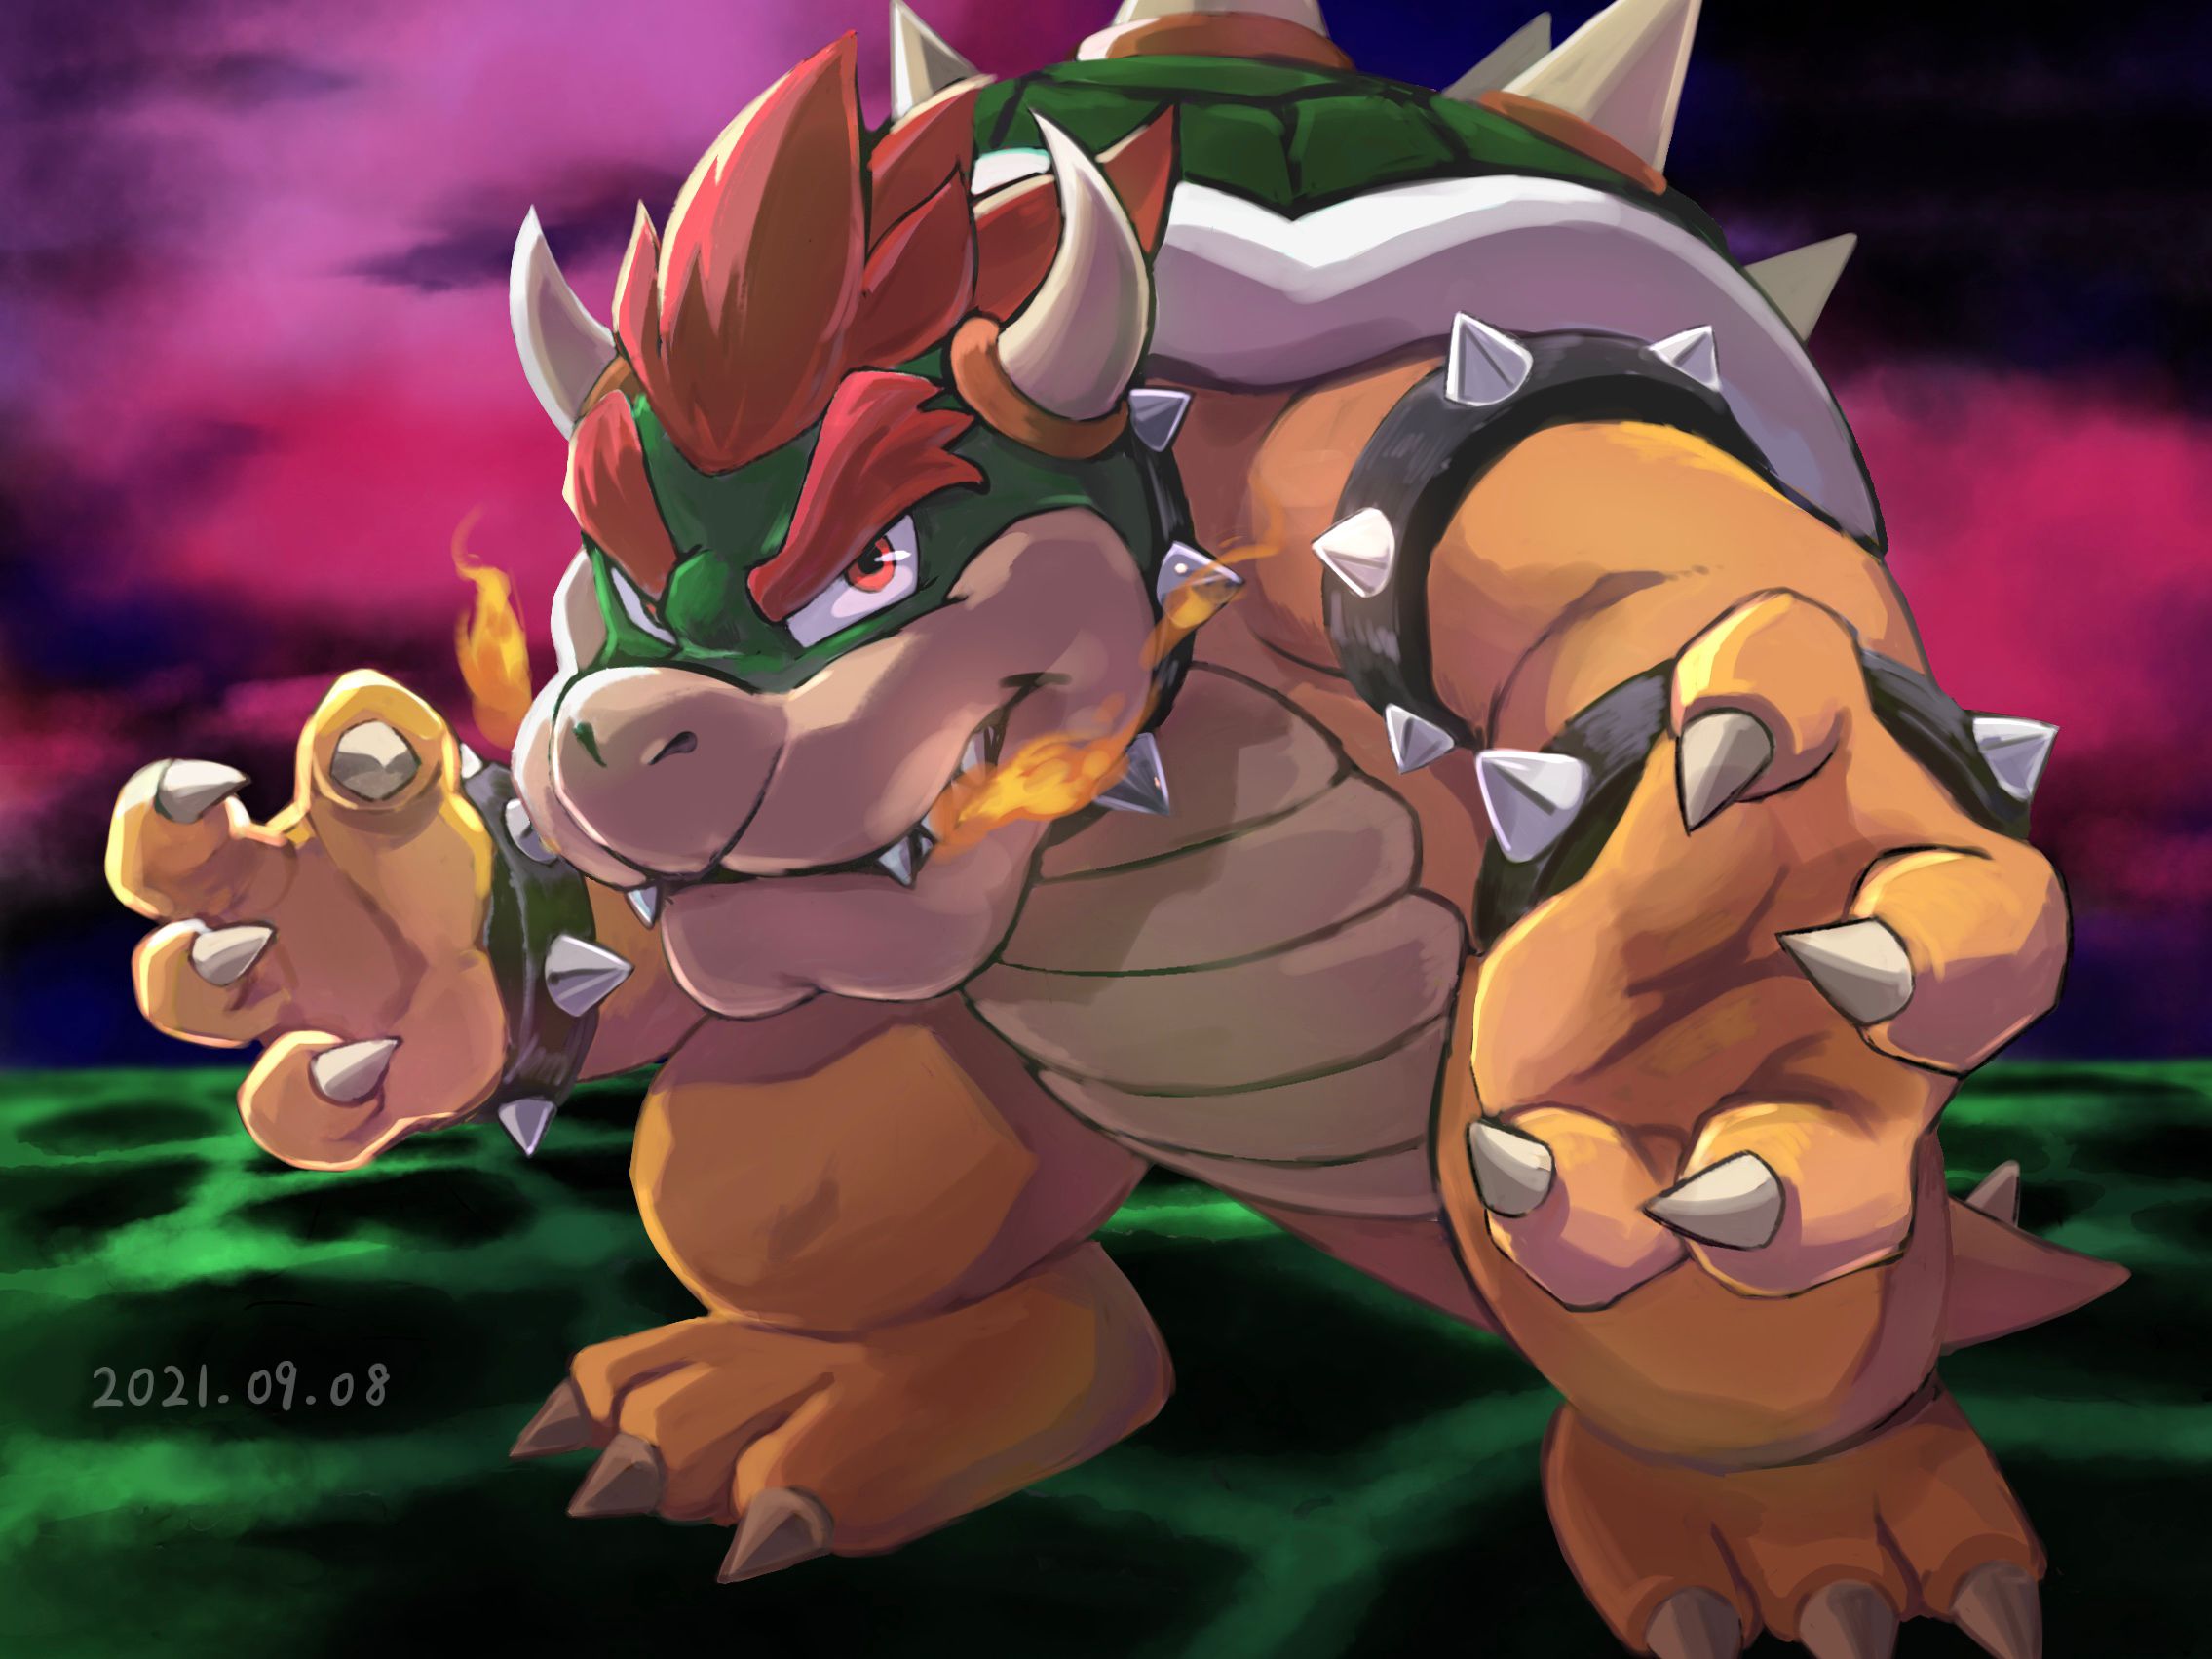 A digital painting of Bowser, the king of the Koopa, from the Mario franchise. - Bowser